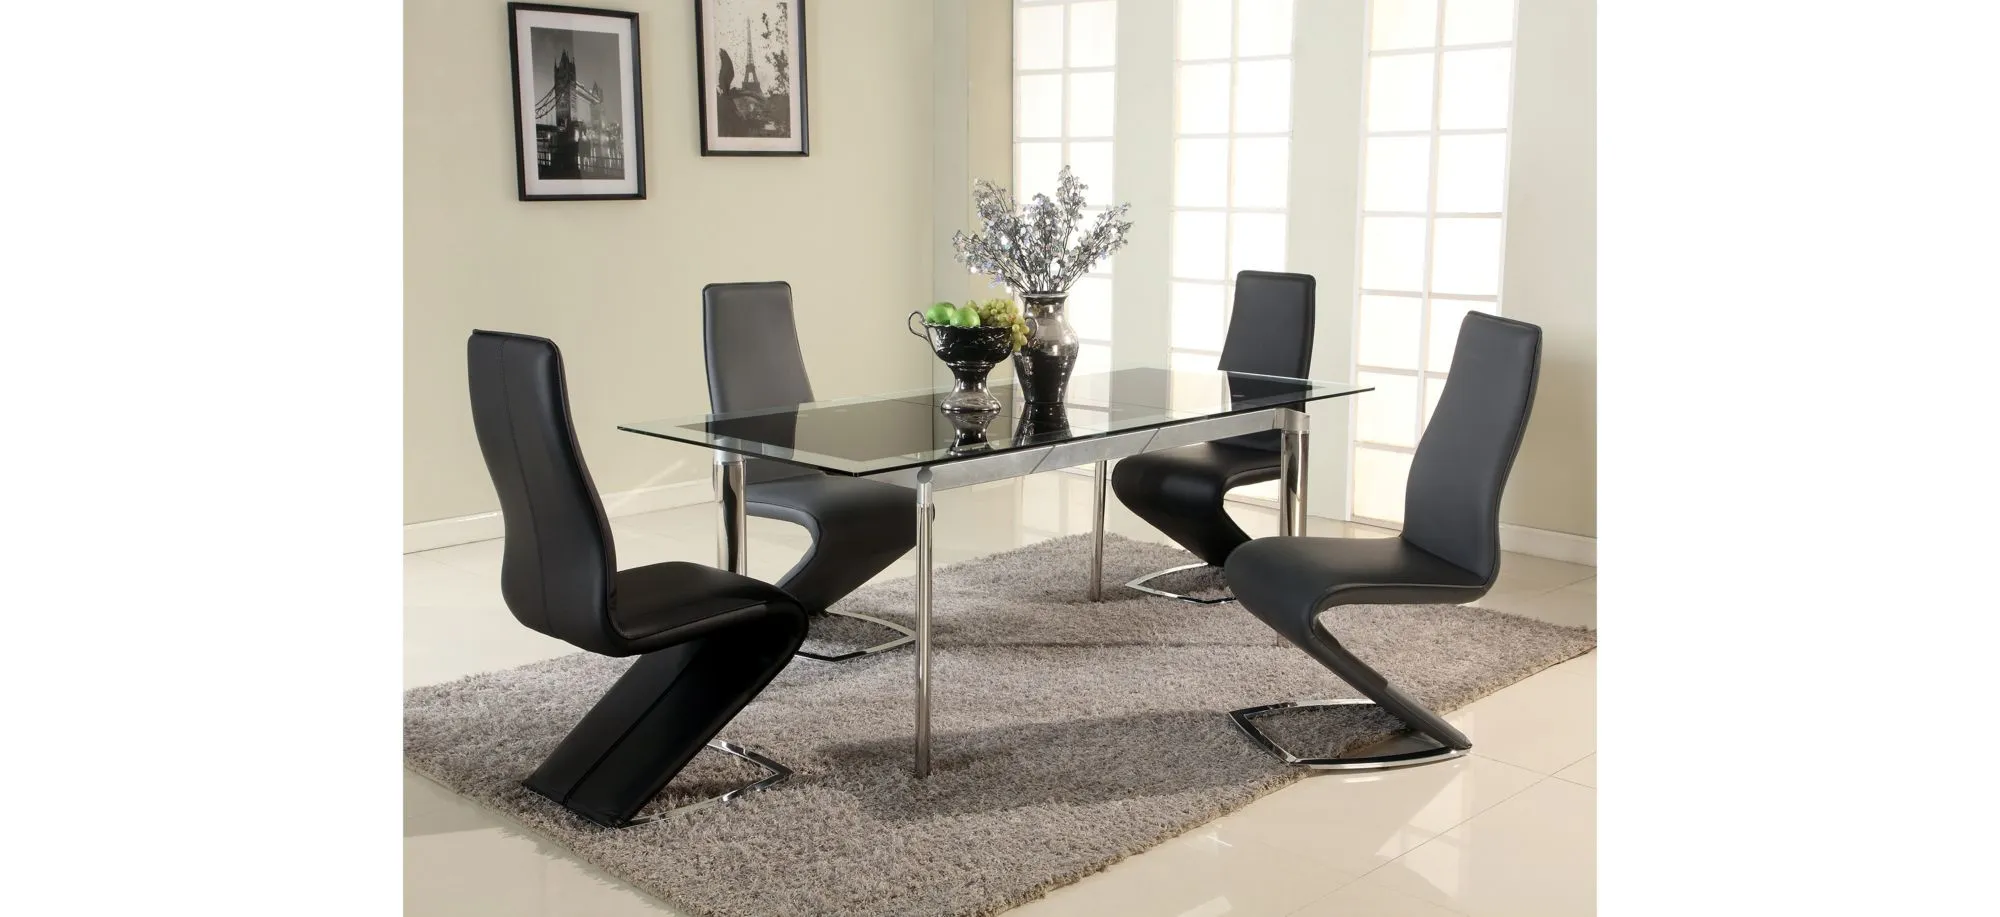 Tarra 5-pc. Dining Set in Black by Chintaly Imports